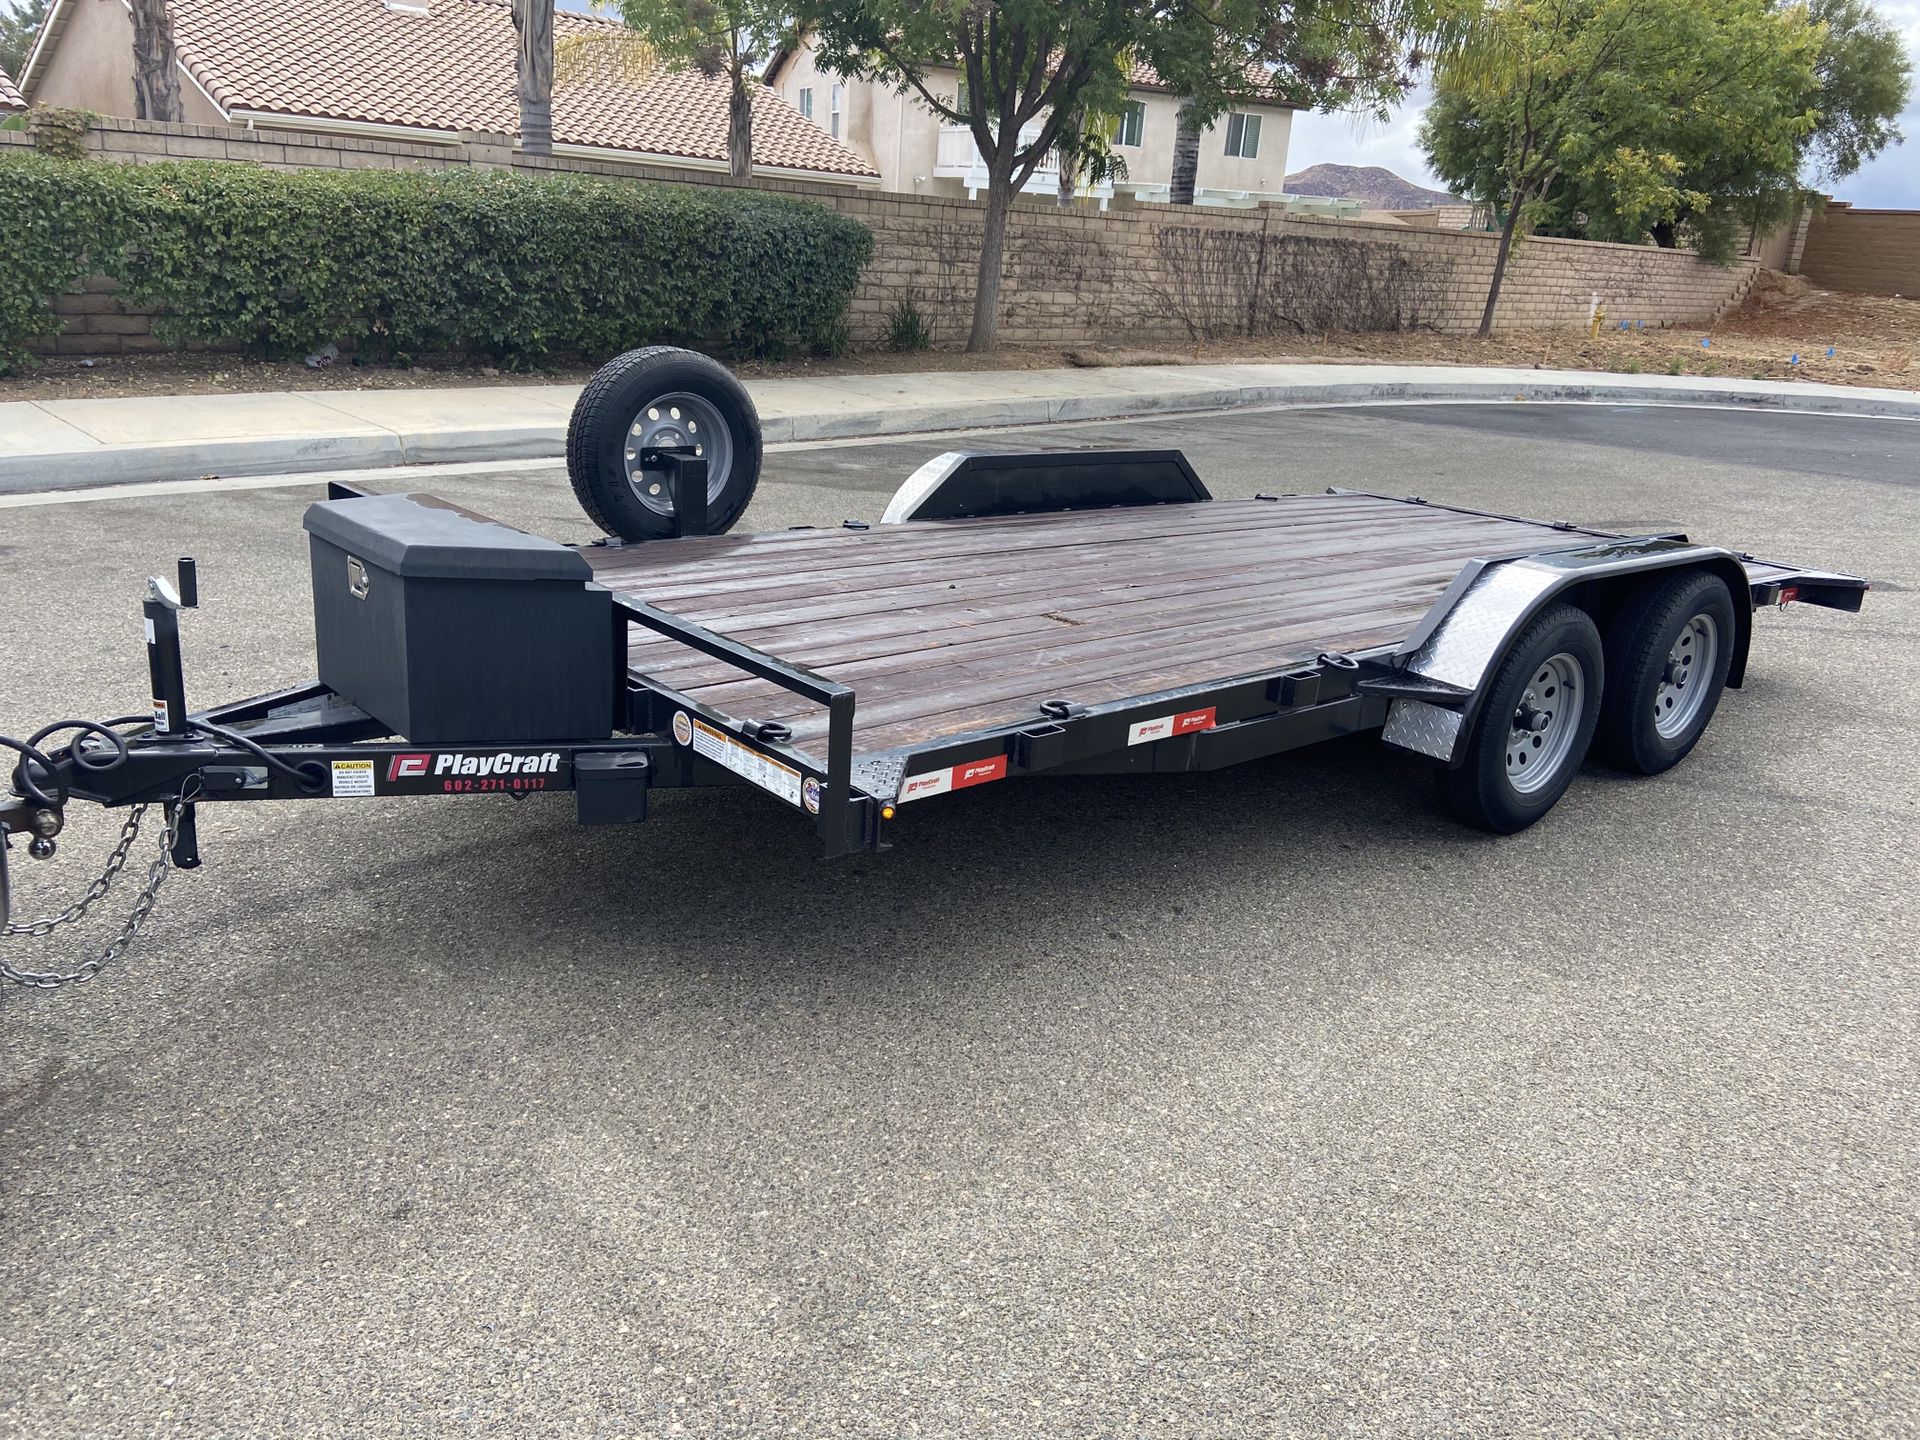 PlayCraft car hauler trailer 16’ long by 83” wide With electric brakes